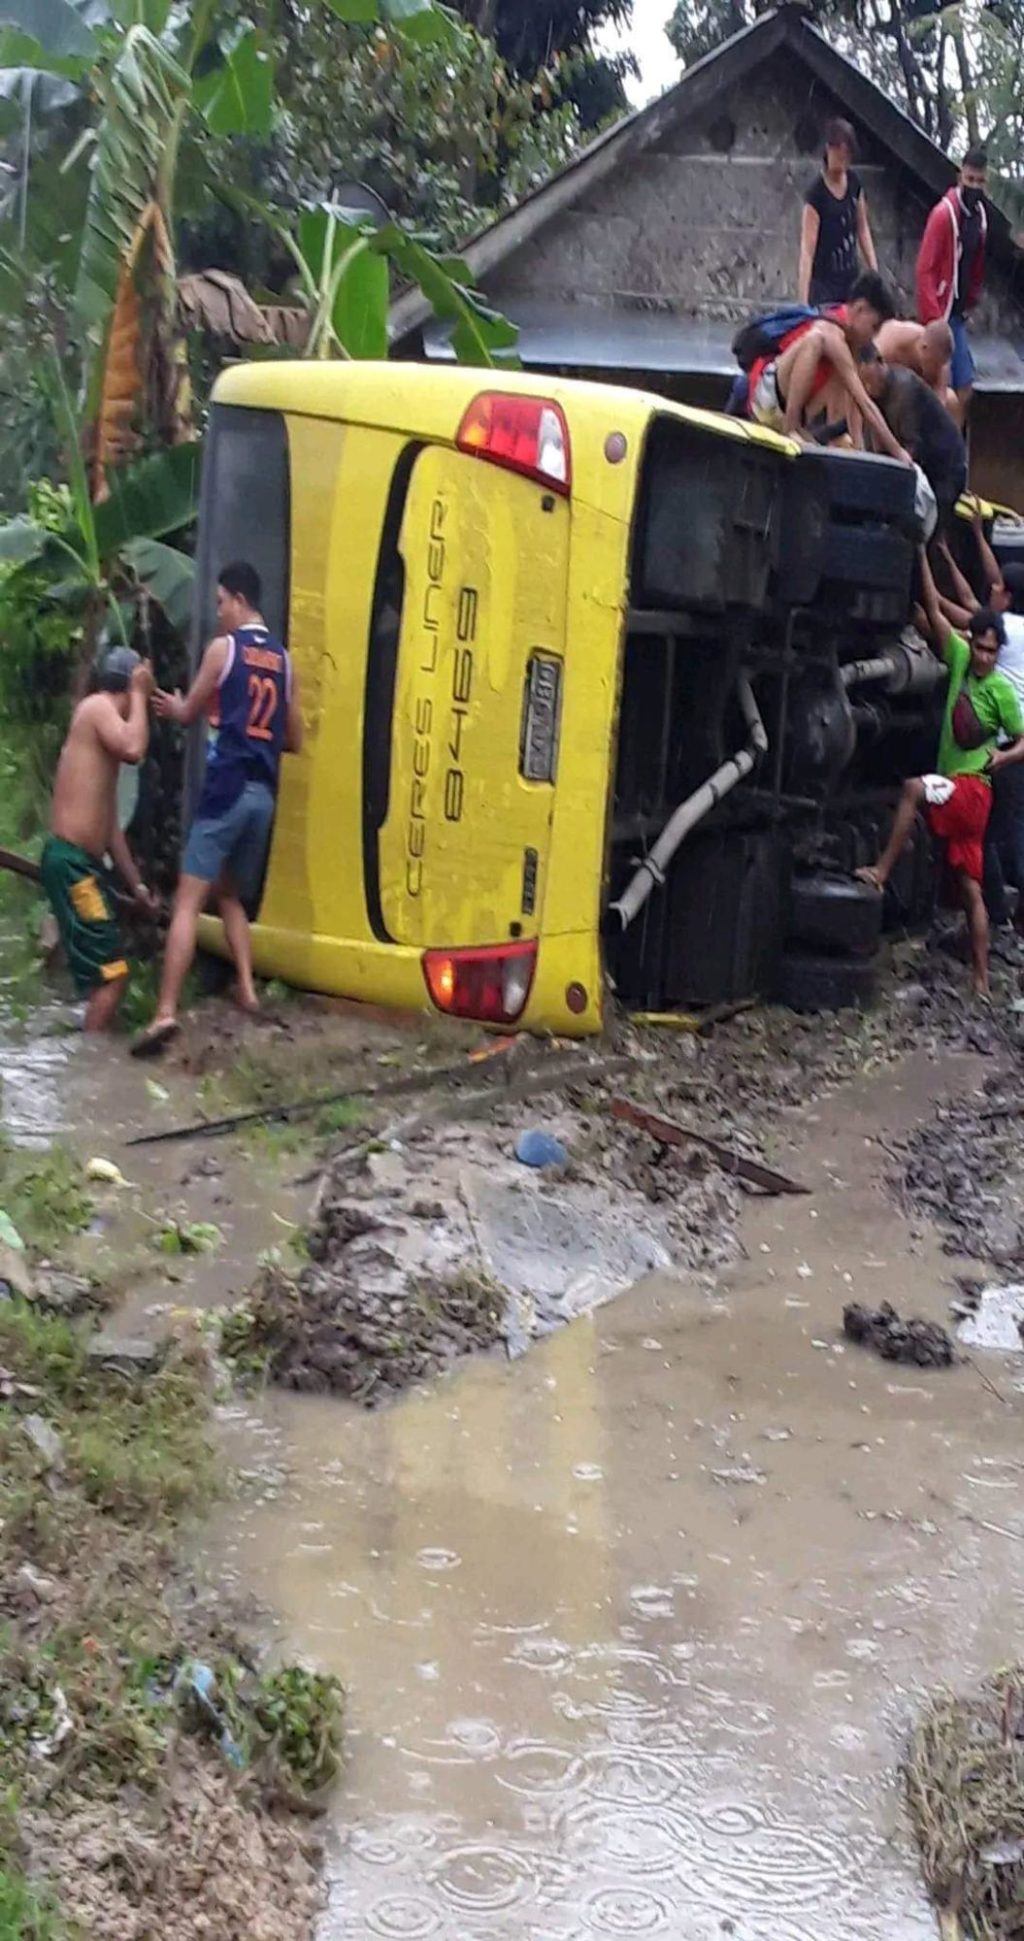 Badian accident: Bus hits motorcycle; 1 dead, 25 hurt. A passenger bus fell on its side after the driver lost control when the bus hit a motorcycle at around 1 p.m. on Thursday, Jan. 12, 2023, in Barangay Banhigan, Badian town, southwestern Cebu. The accident caused the death of a 15-year-old boy and injury to 25 others. | Contributed photo